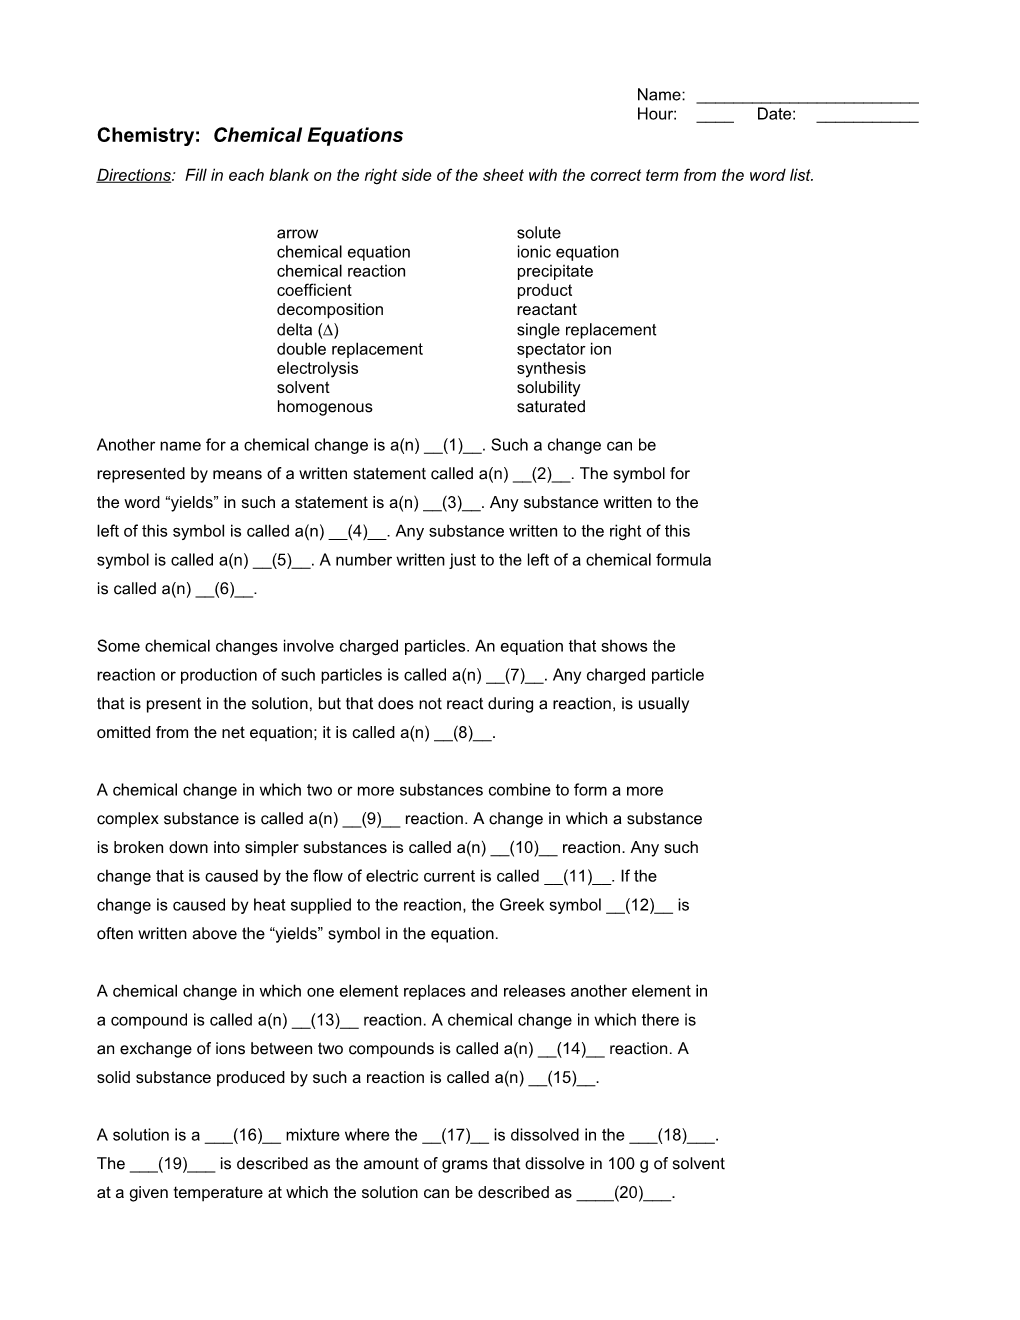 Vocabulary WS Chemical Equations (World List Paragraph)